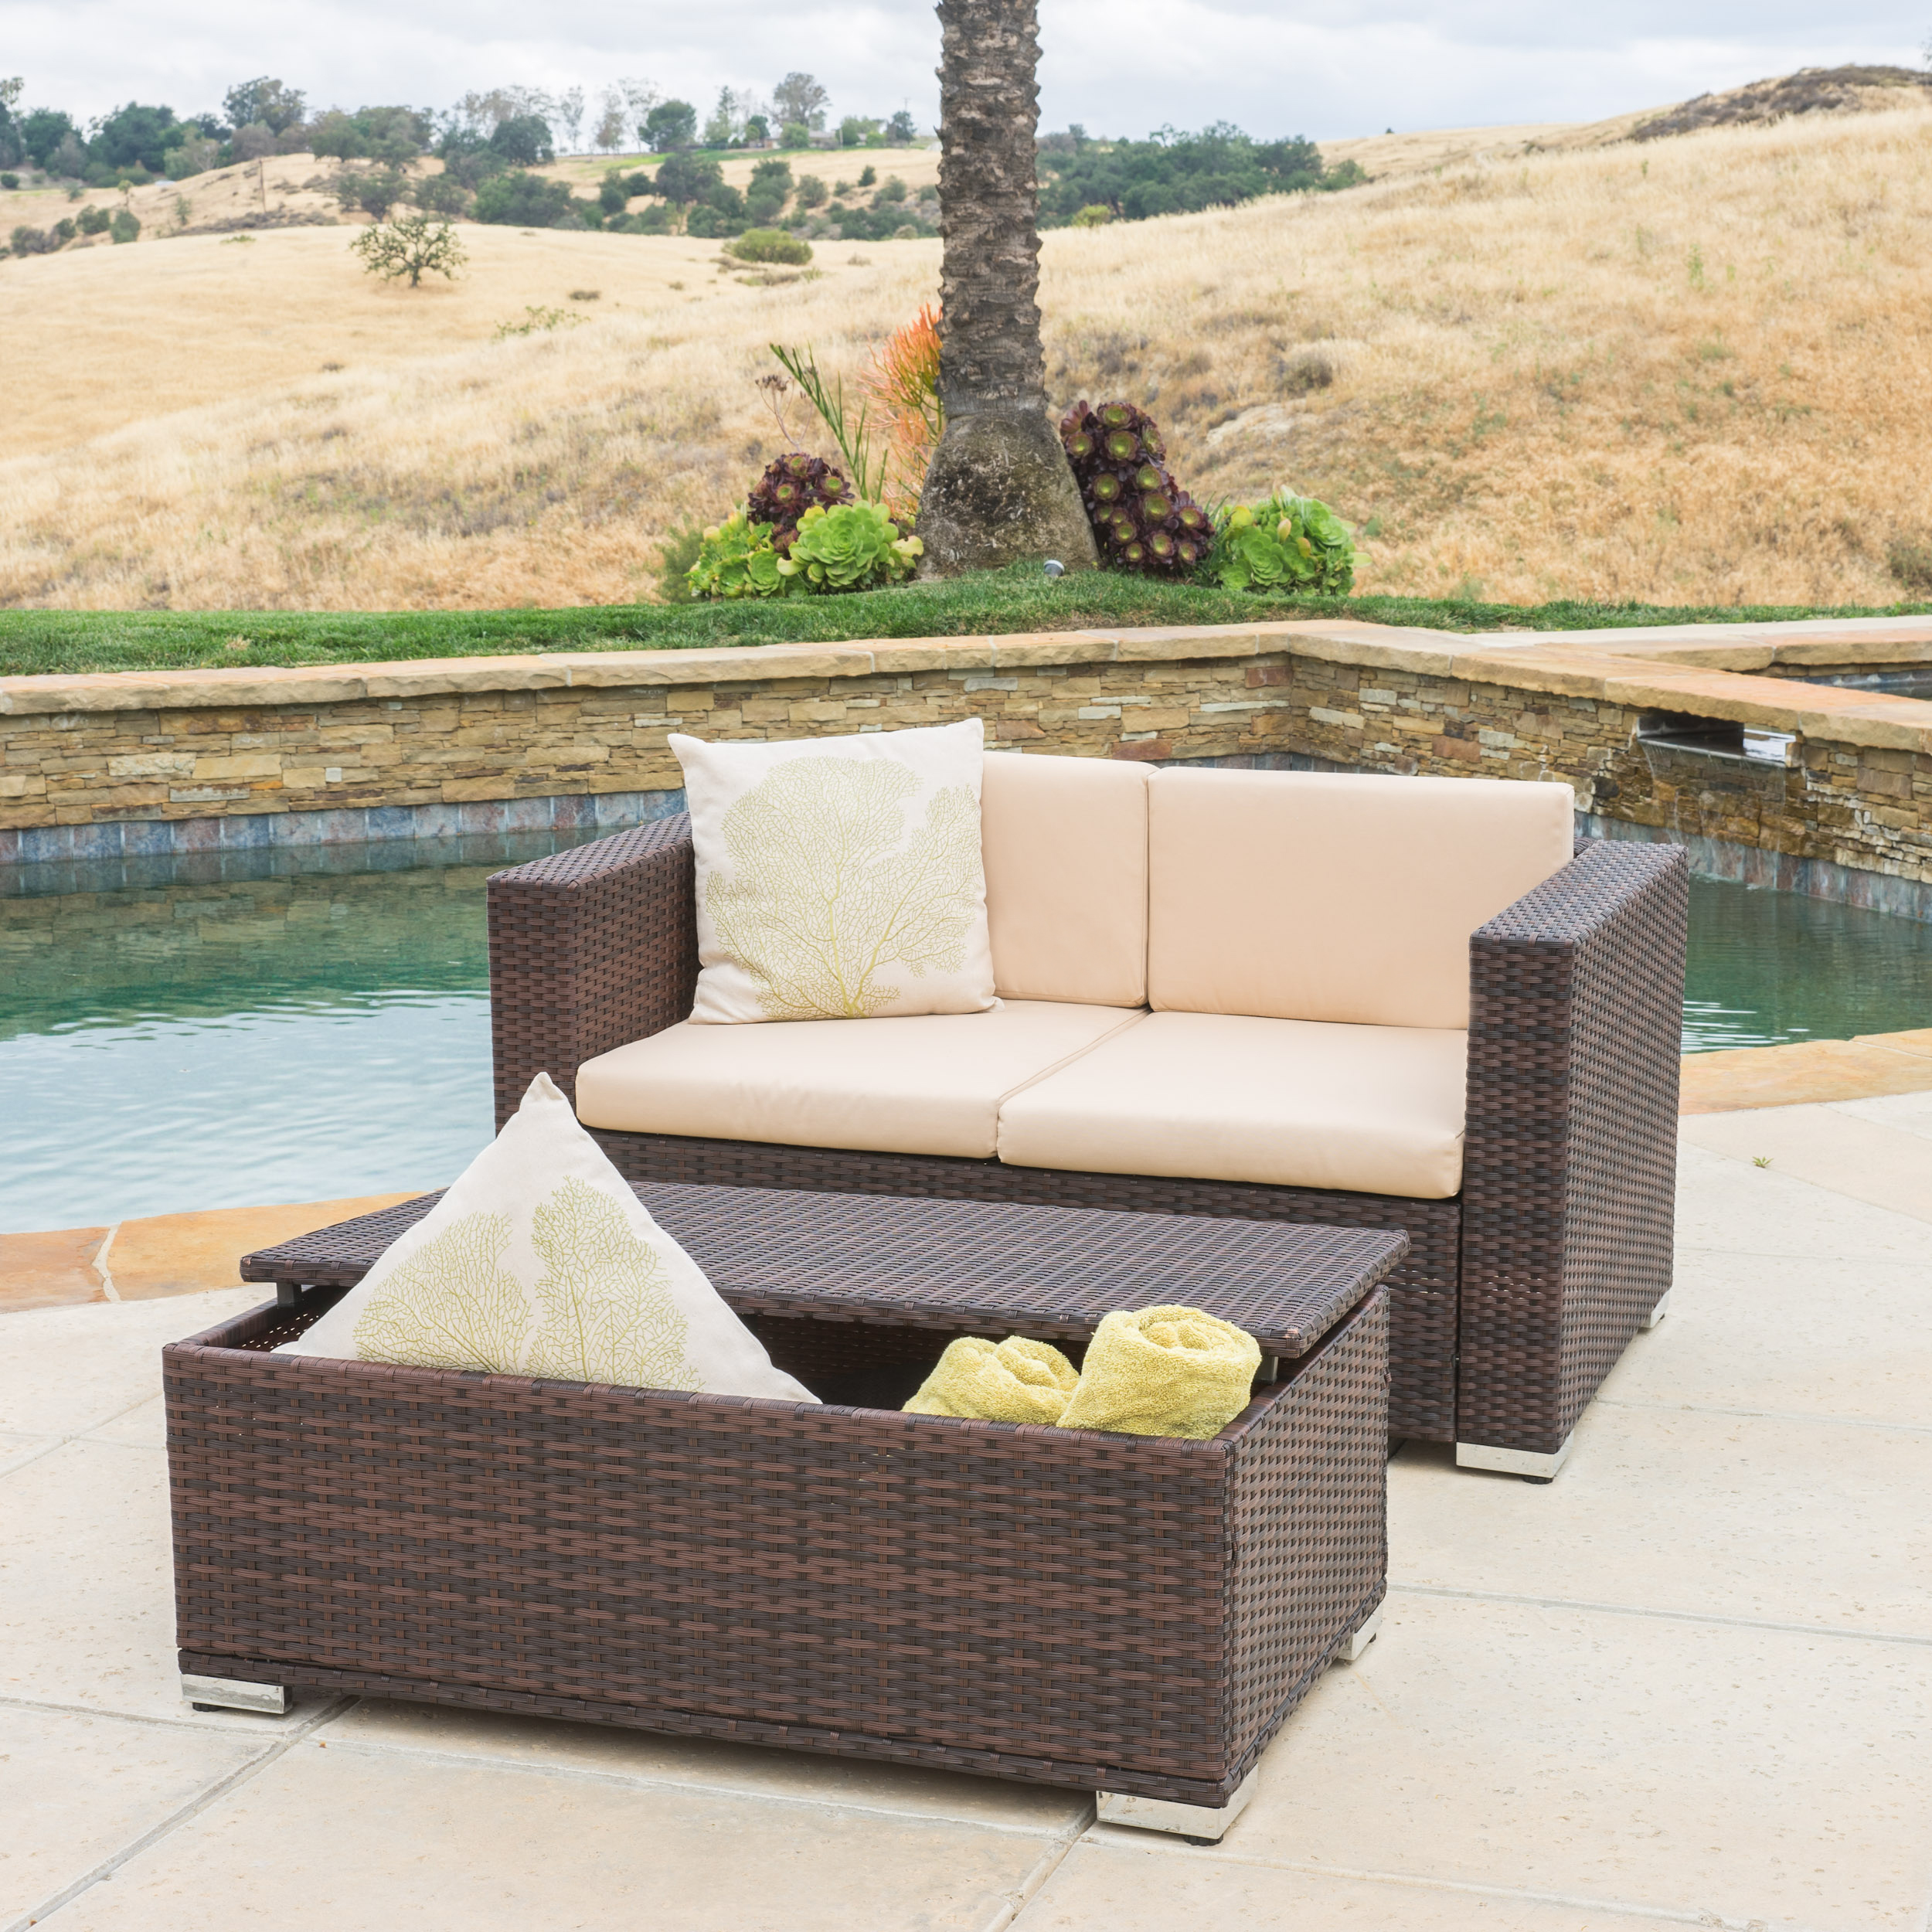 Gibson Outdoor 2-piece Aluminum Chat Set with Cushions, Brown and Beige - image 1 of 8